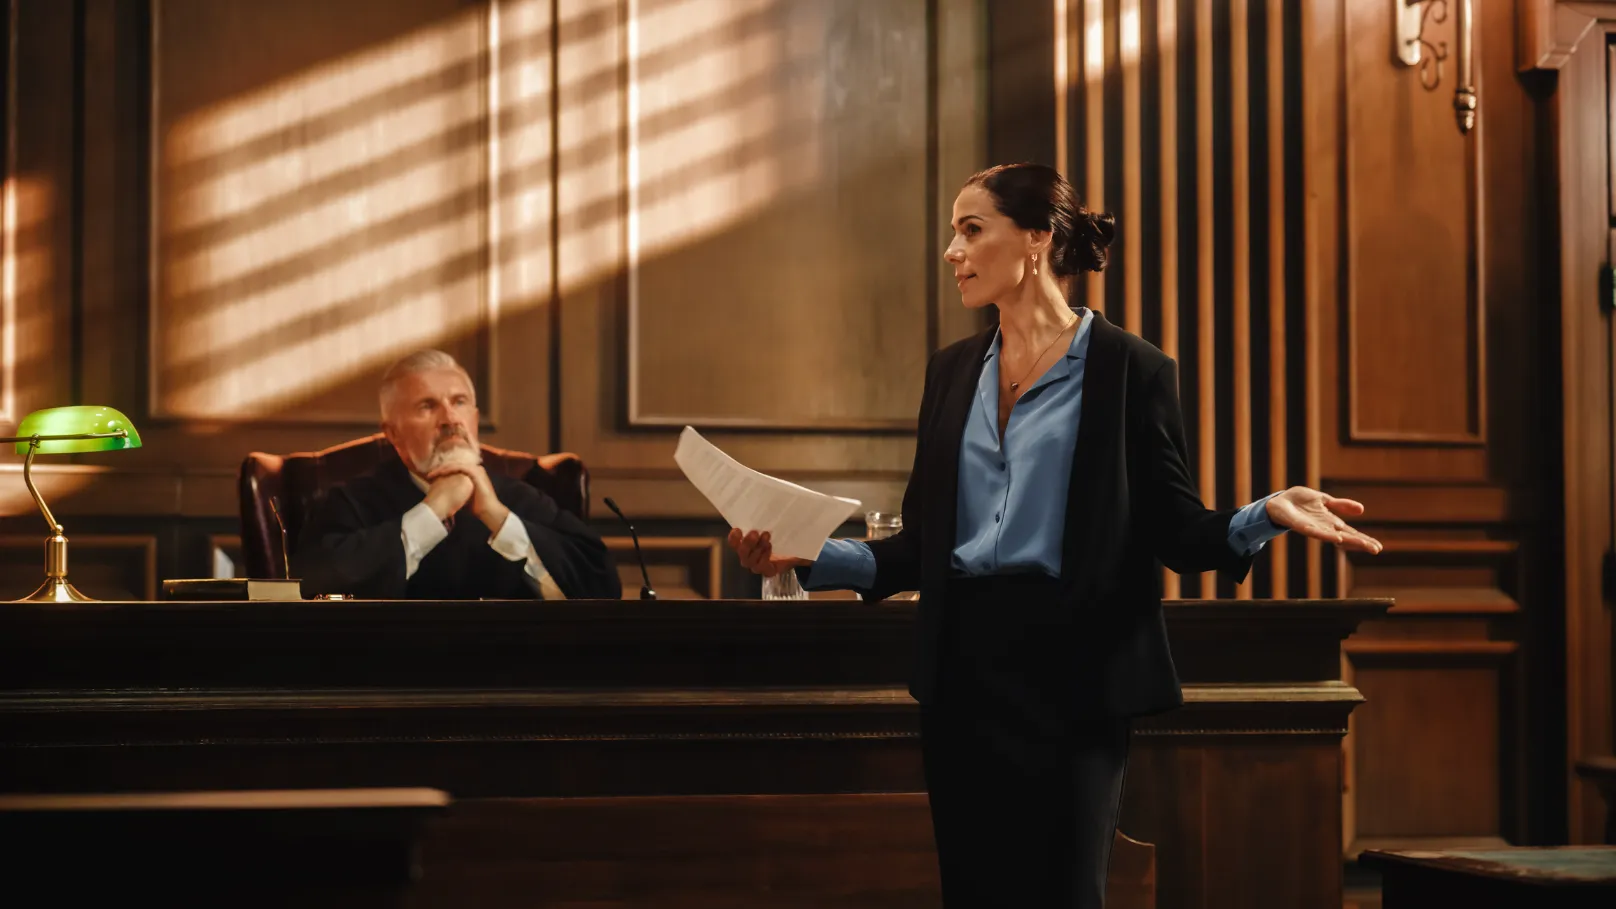 An attorney speaking in front of a judge in a courthouse.